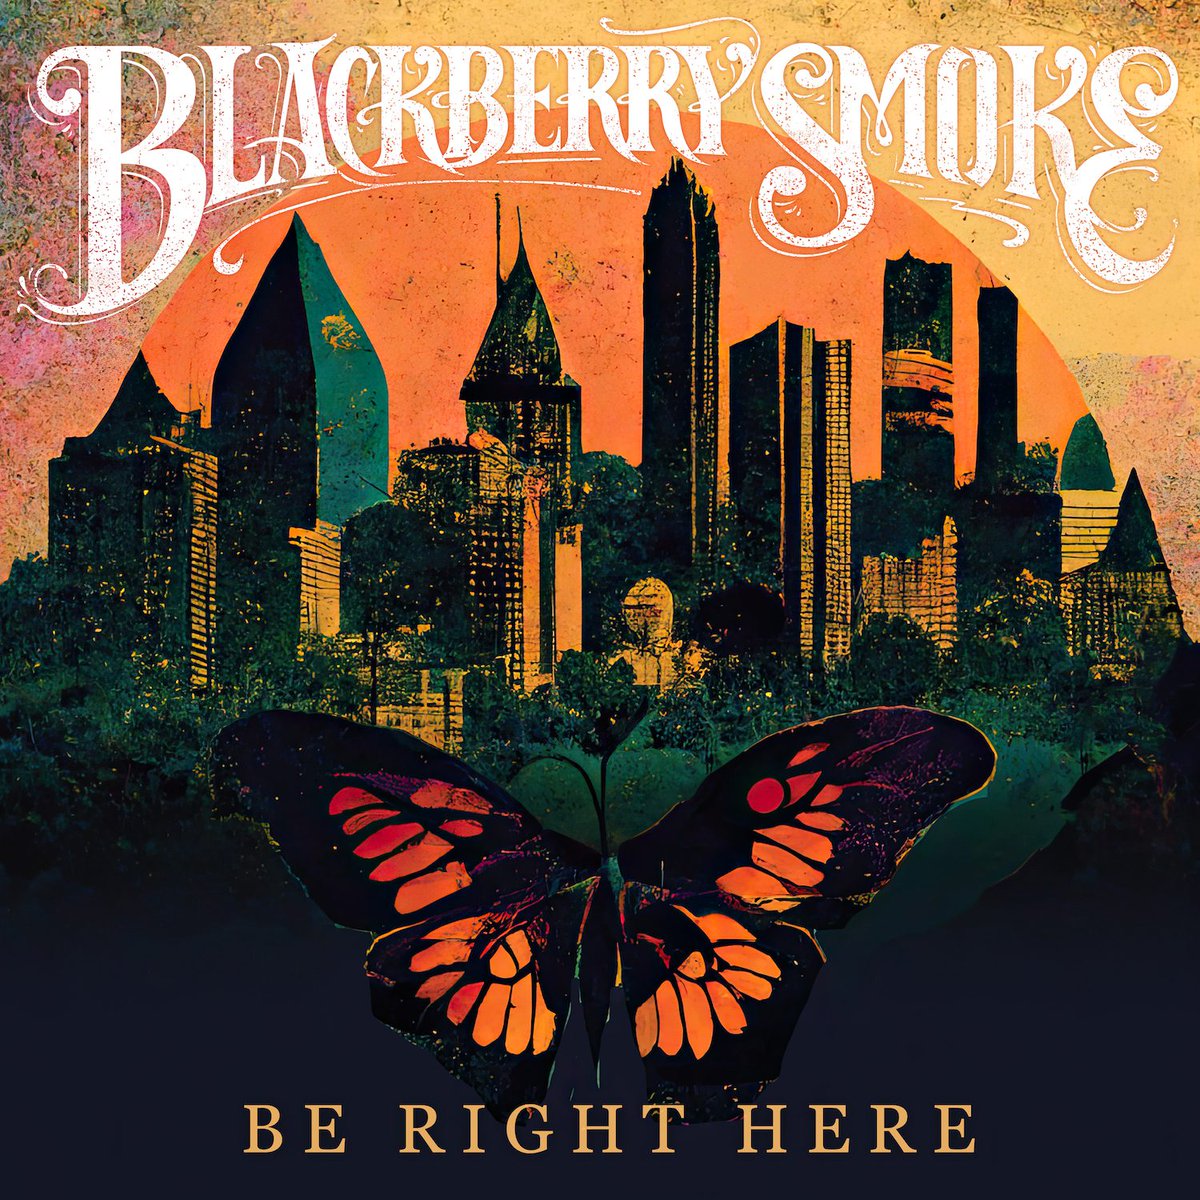 MM Radio bringing you 100% pure eargasm with Dig A Hole thanks to @blackberrysmoke Listen here on mm-radio.com